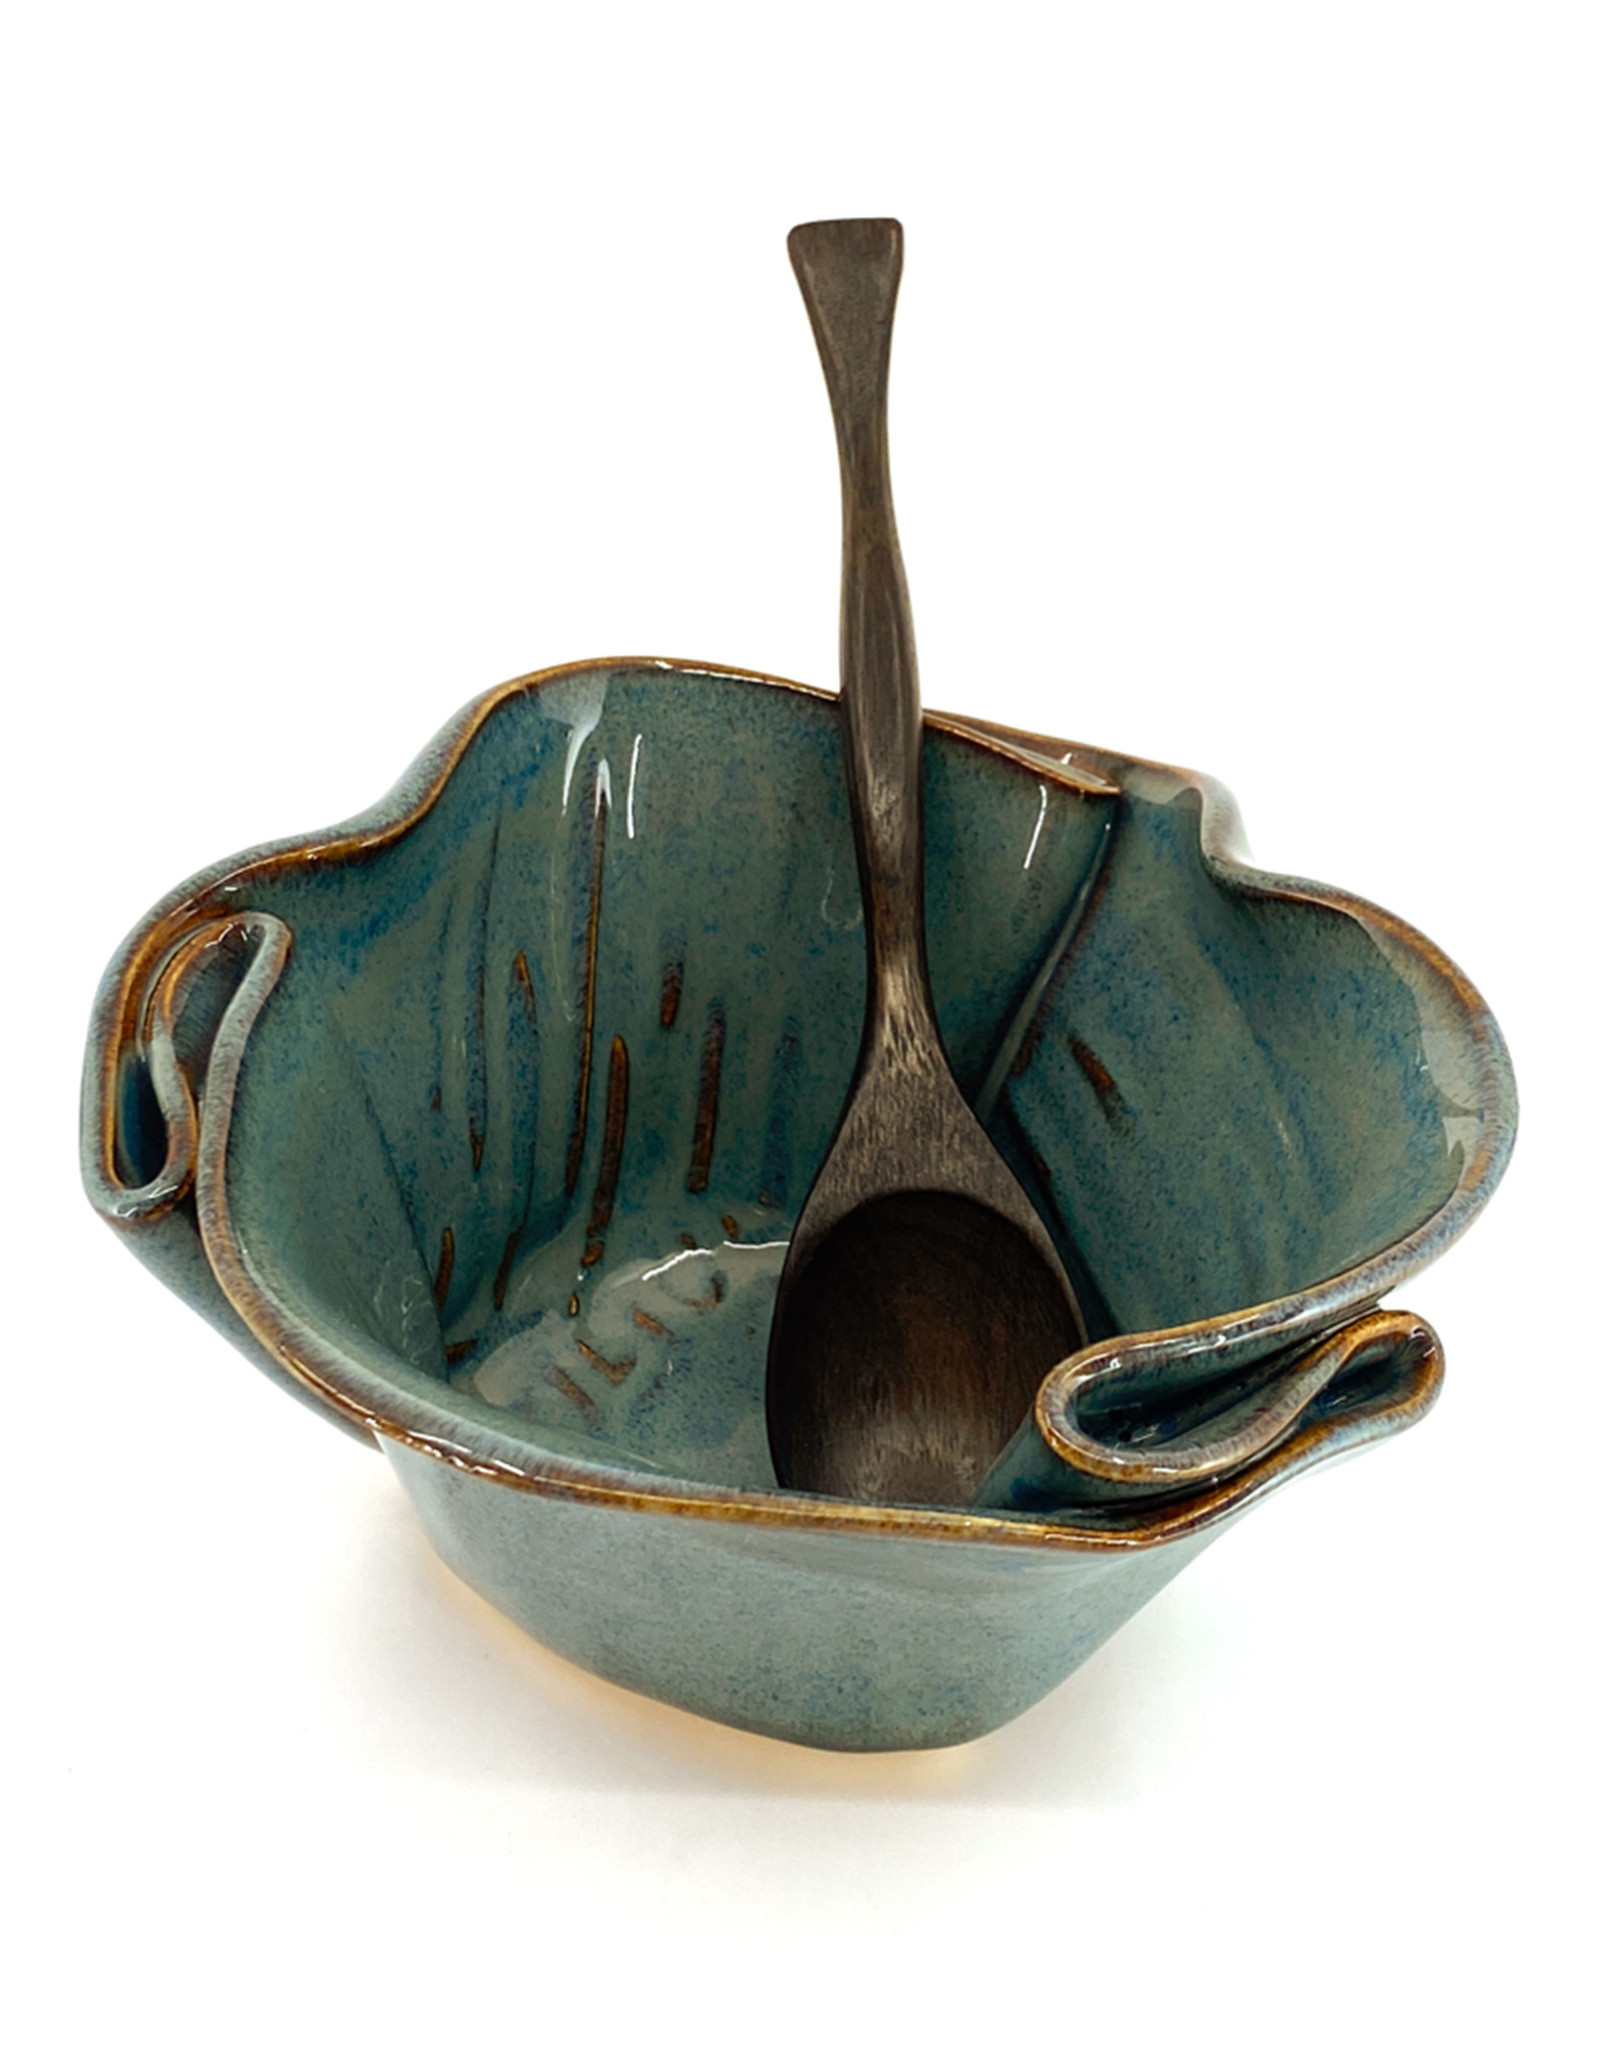 HILBORN POTTERY BLUE MEDLEY GUACAMOLE BOWL WITH SPOON